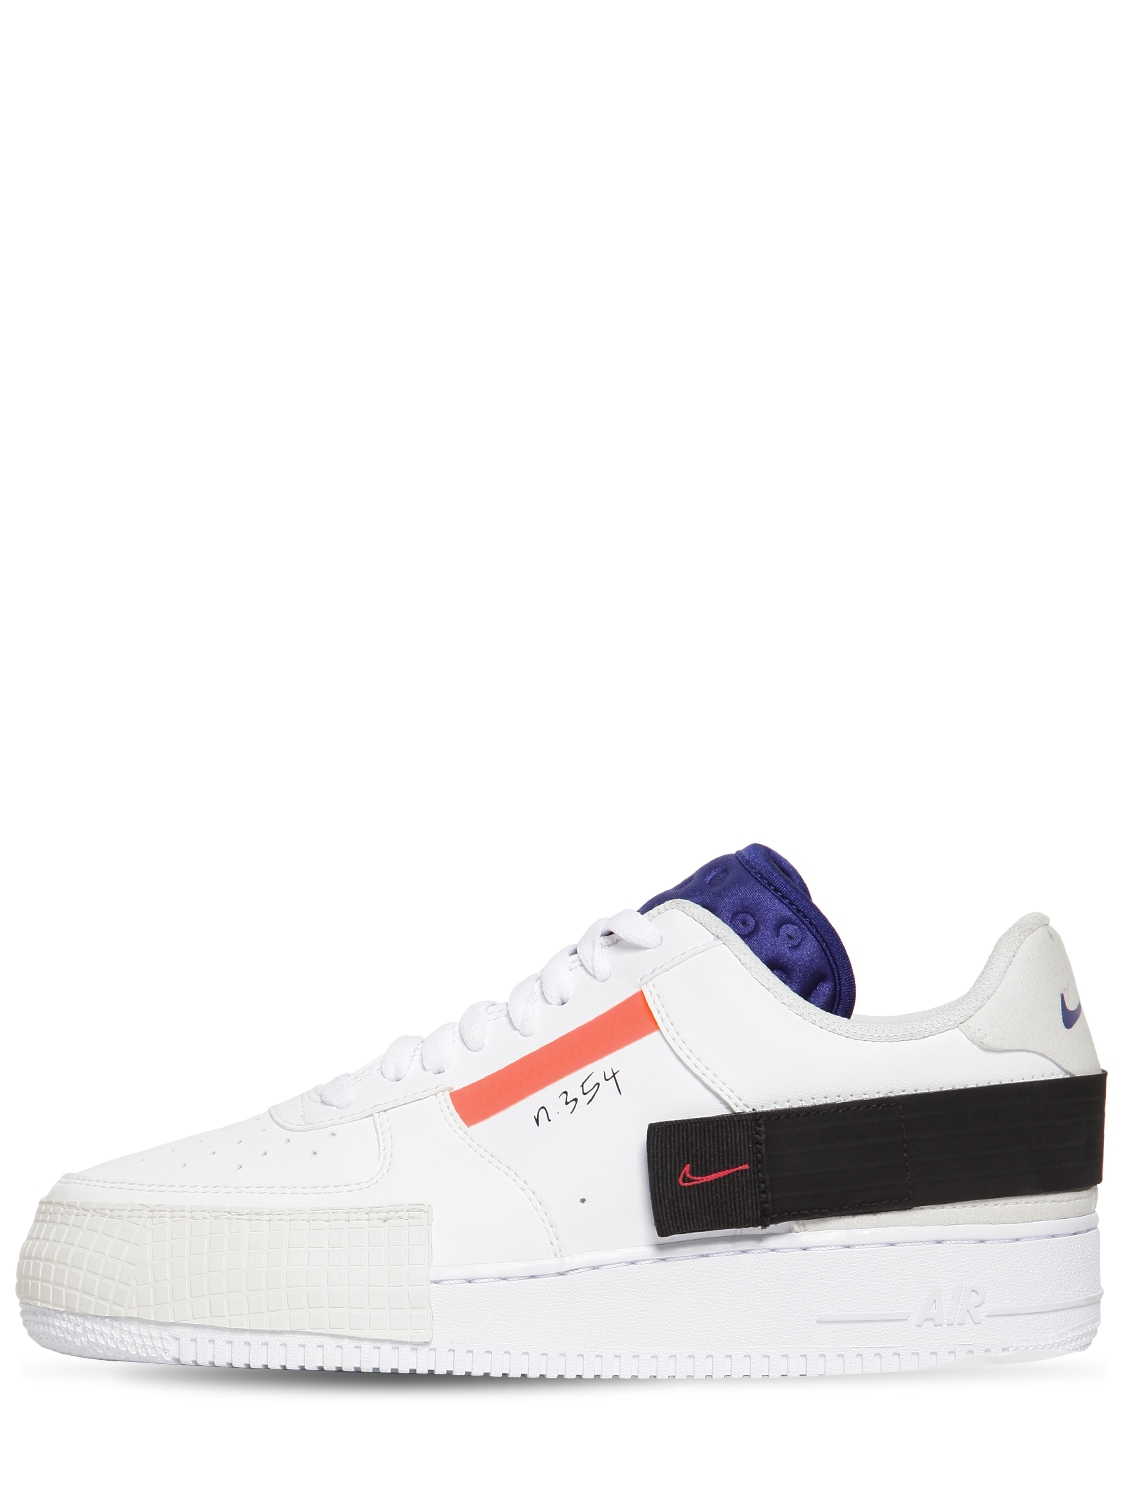 nike air force 1 strap in the back